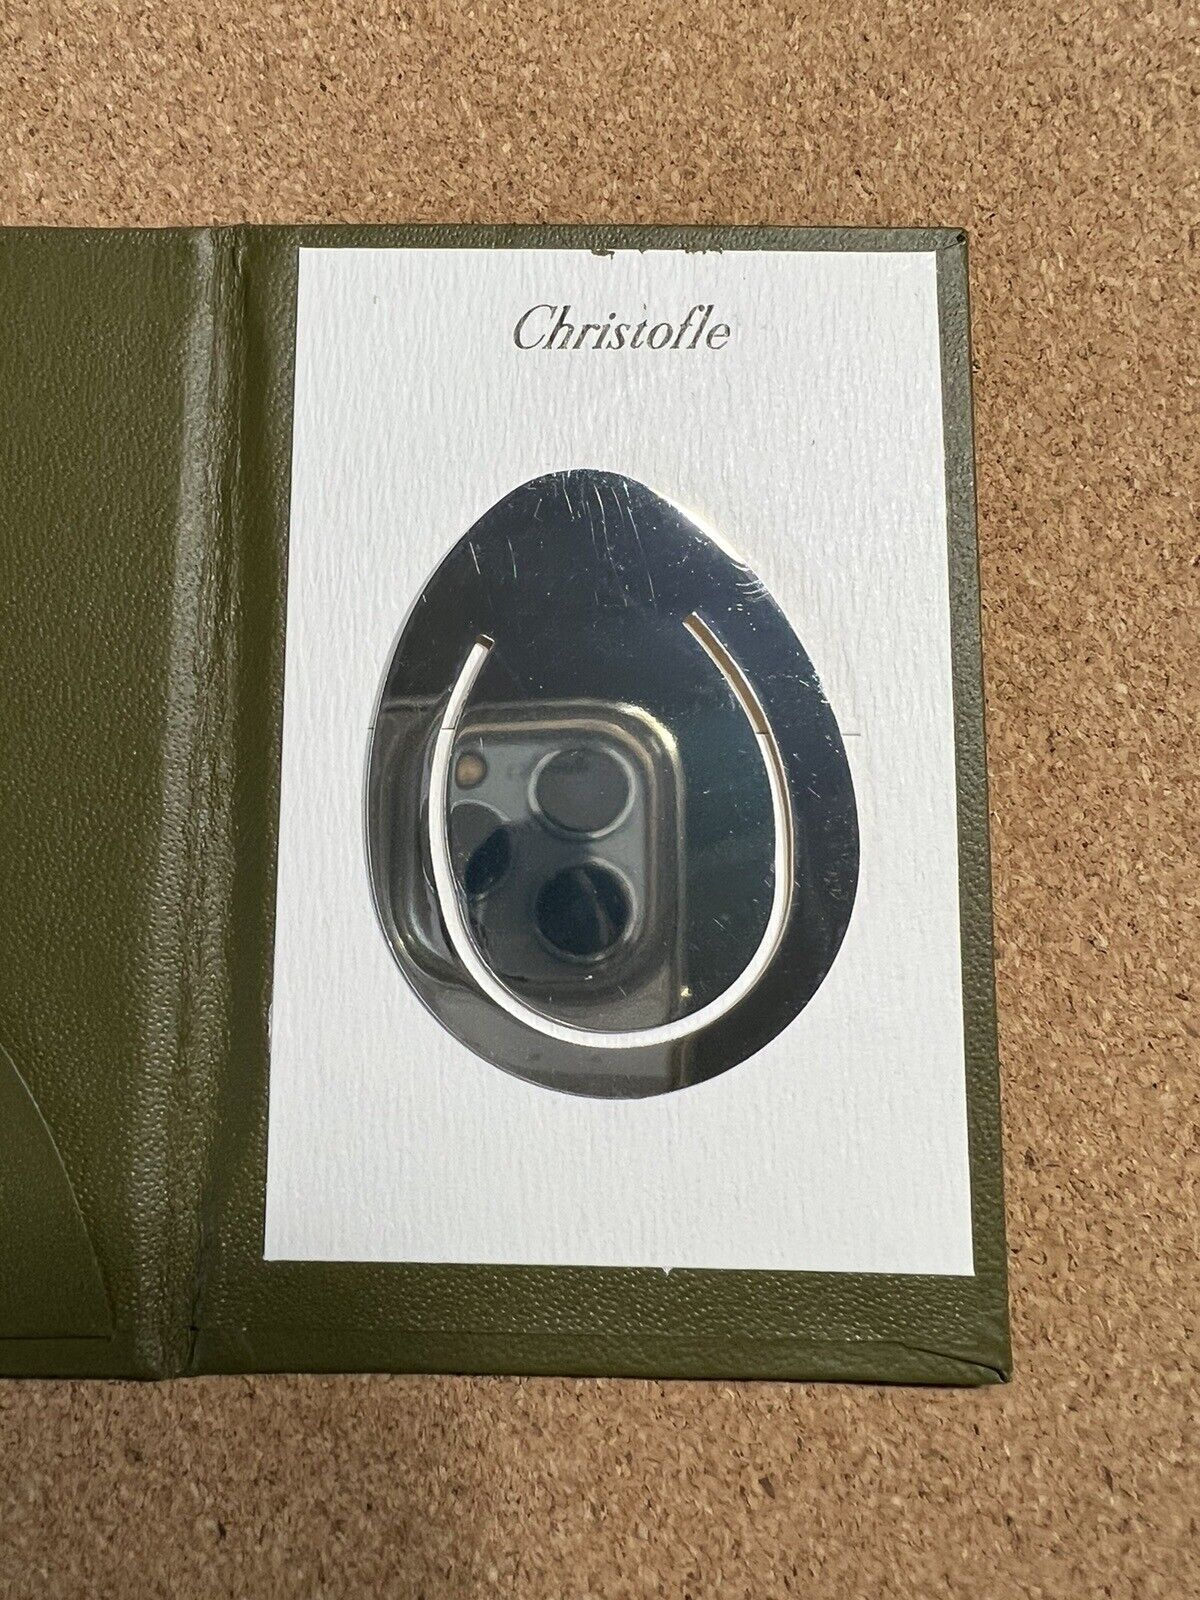 French Christofle Silver Plated Peace Egg Book Page Marker W/Case & Envelope New